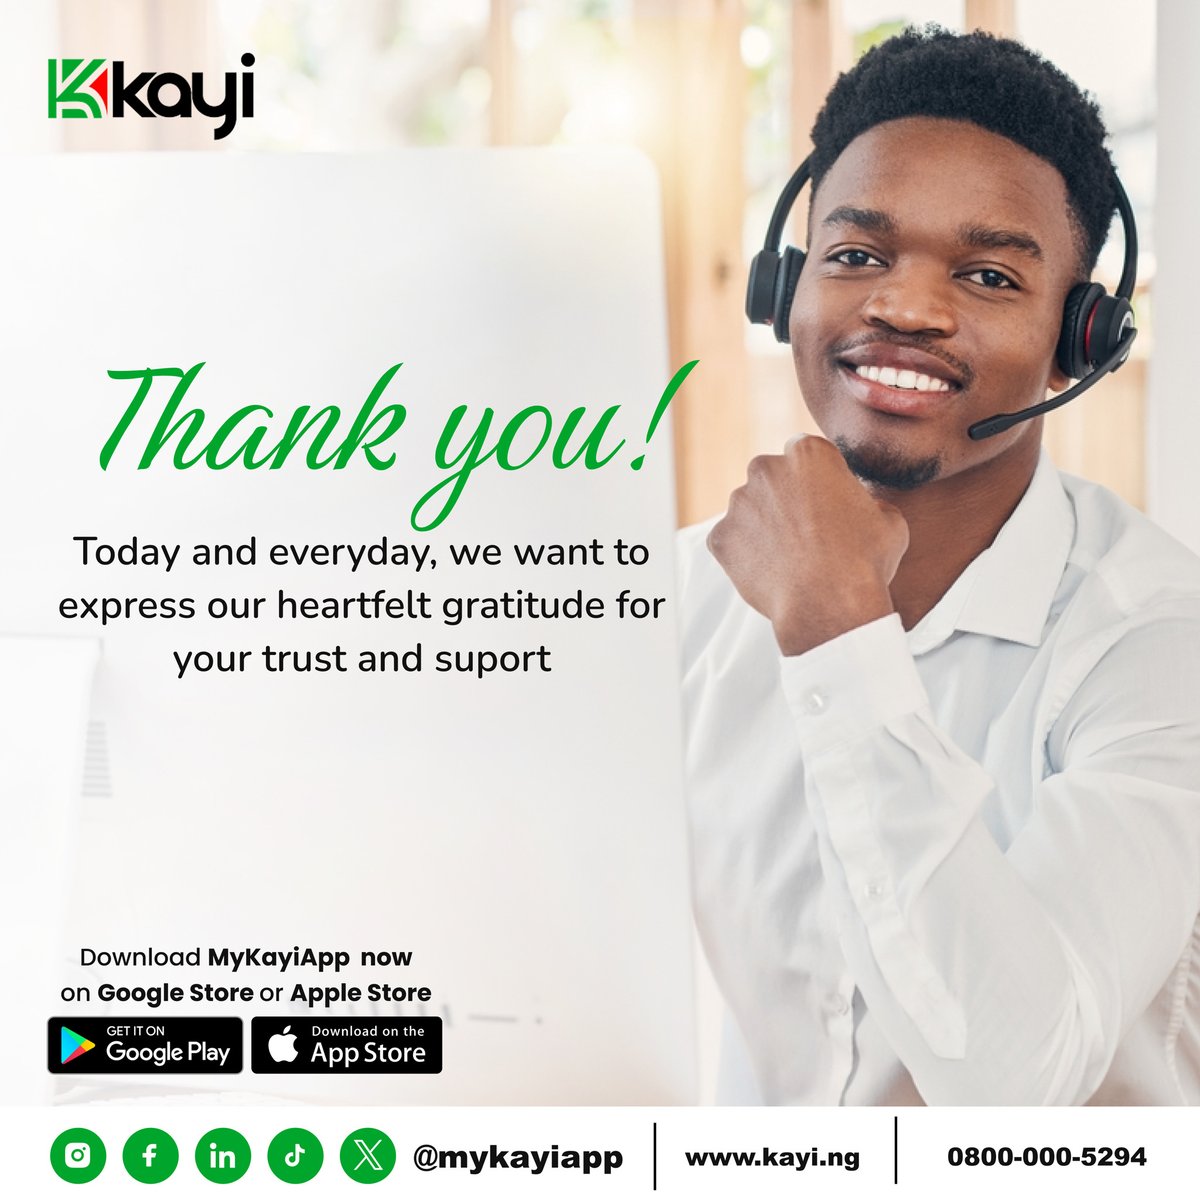 At Kayiapp, our customers are at the heart of everything we do! Today and every day, we want to express our heartfelt gratitude for your trust and support. Thank you for being part of our journey!

#CustomerAppreciation #Kayiapp #Gratitude
#Mykayiapp
#Kayiway
#Digitalbanking